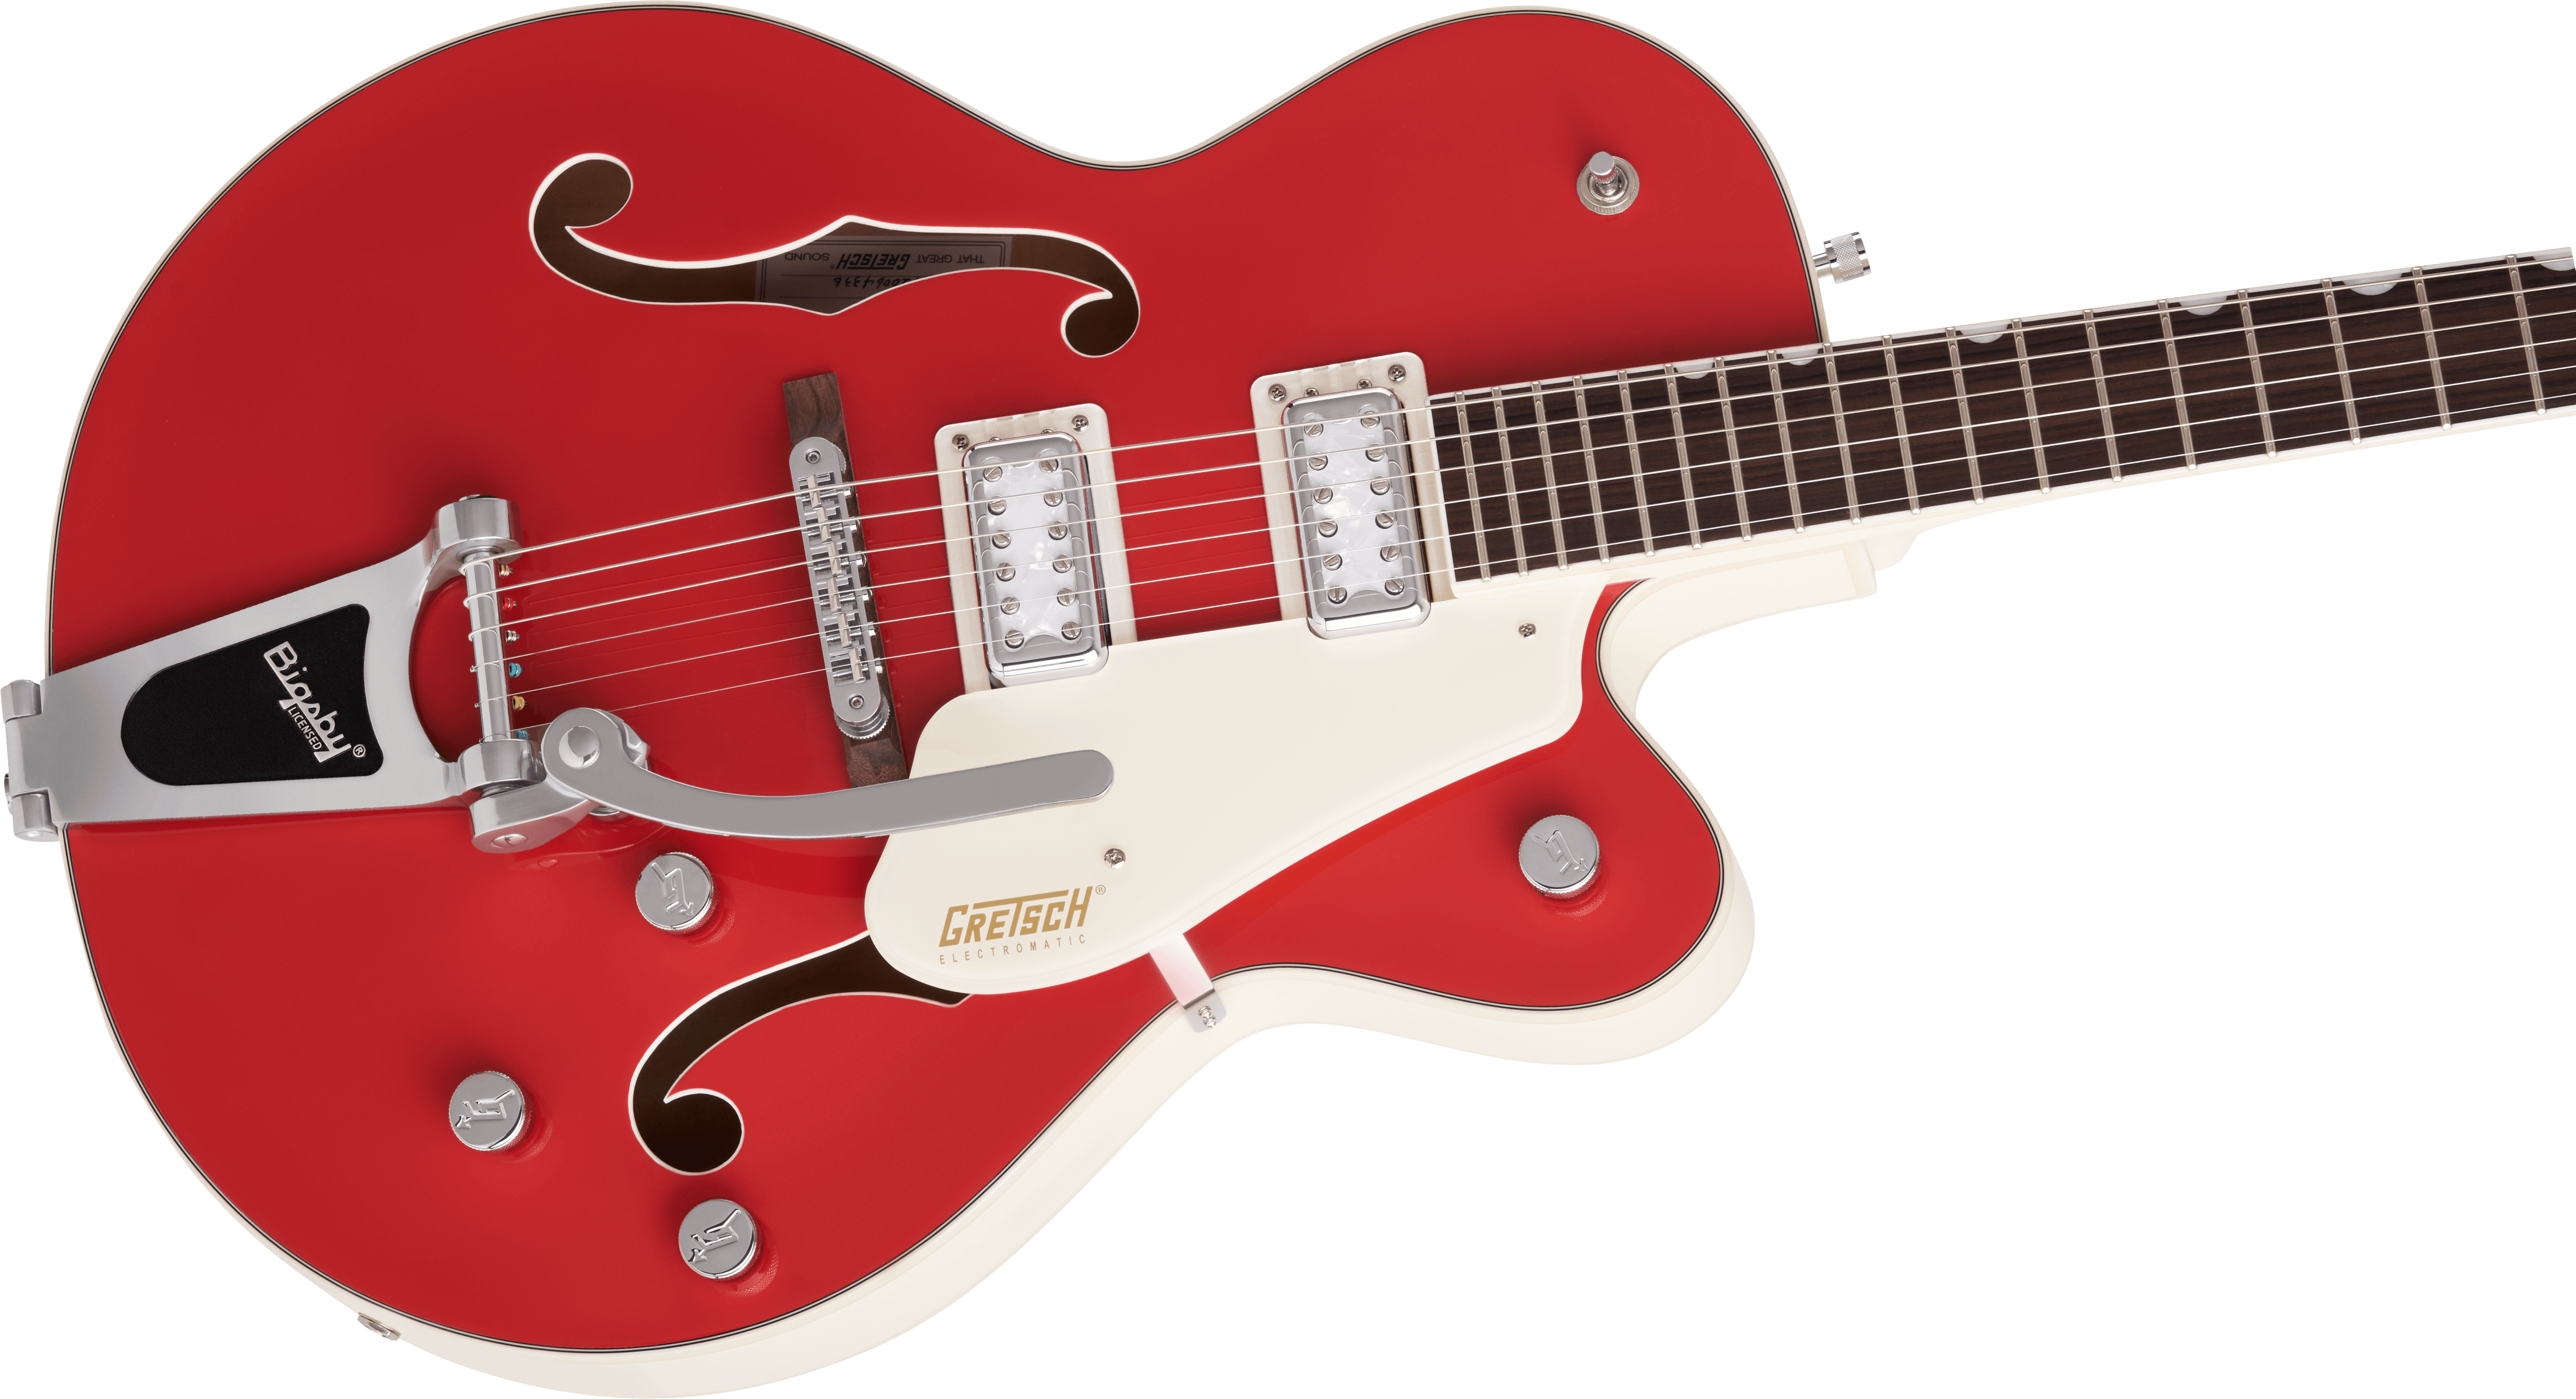 Gretsch G5410T Electromatic Limited Edition Tri-Five, Two-Tone Fiesta Red/Vintage White